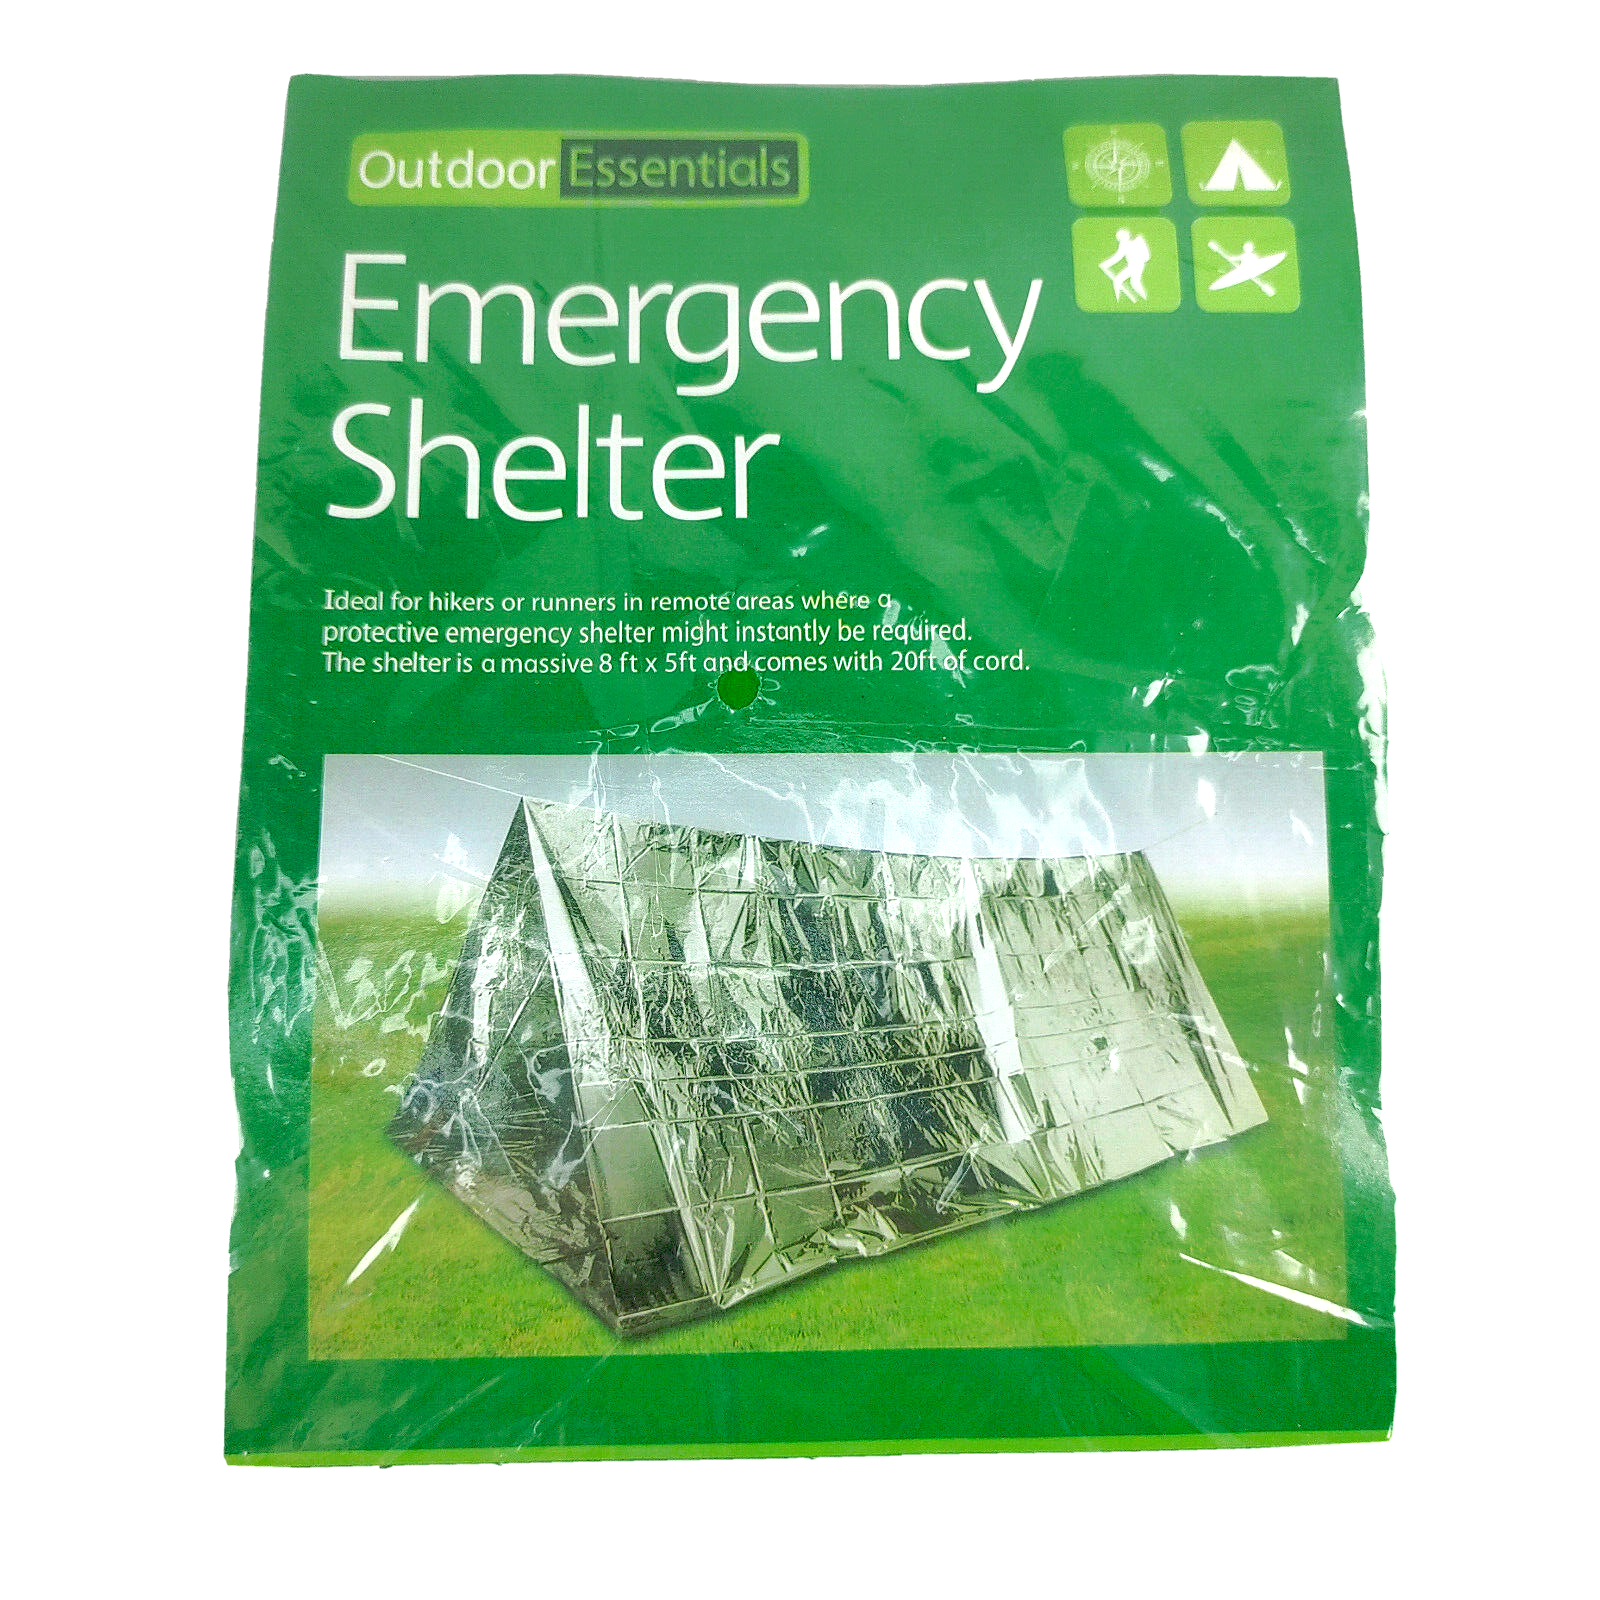 Emergency Shelter by Outdoor Essentials  1-2 Person Rescue Tent Hiking Backpack